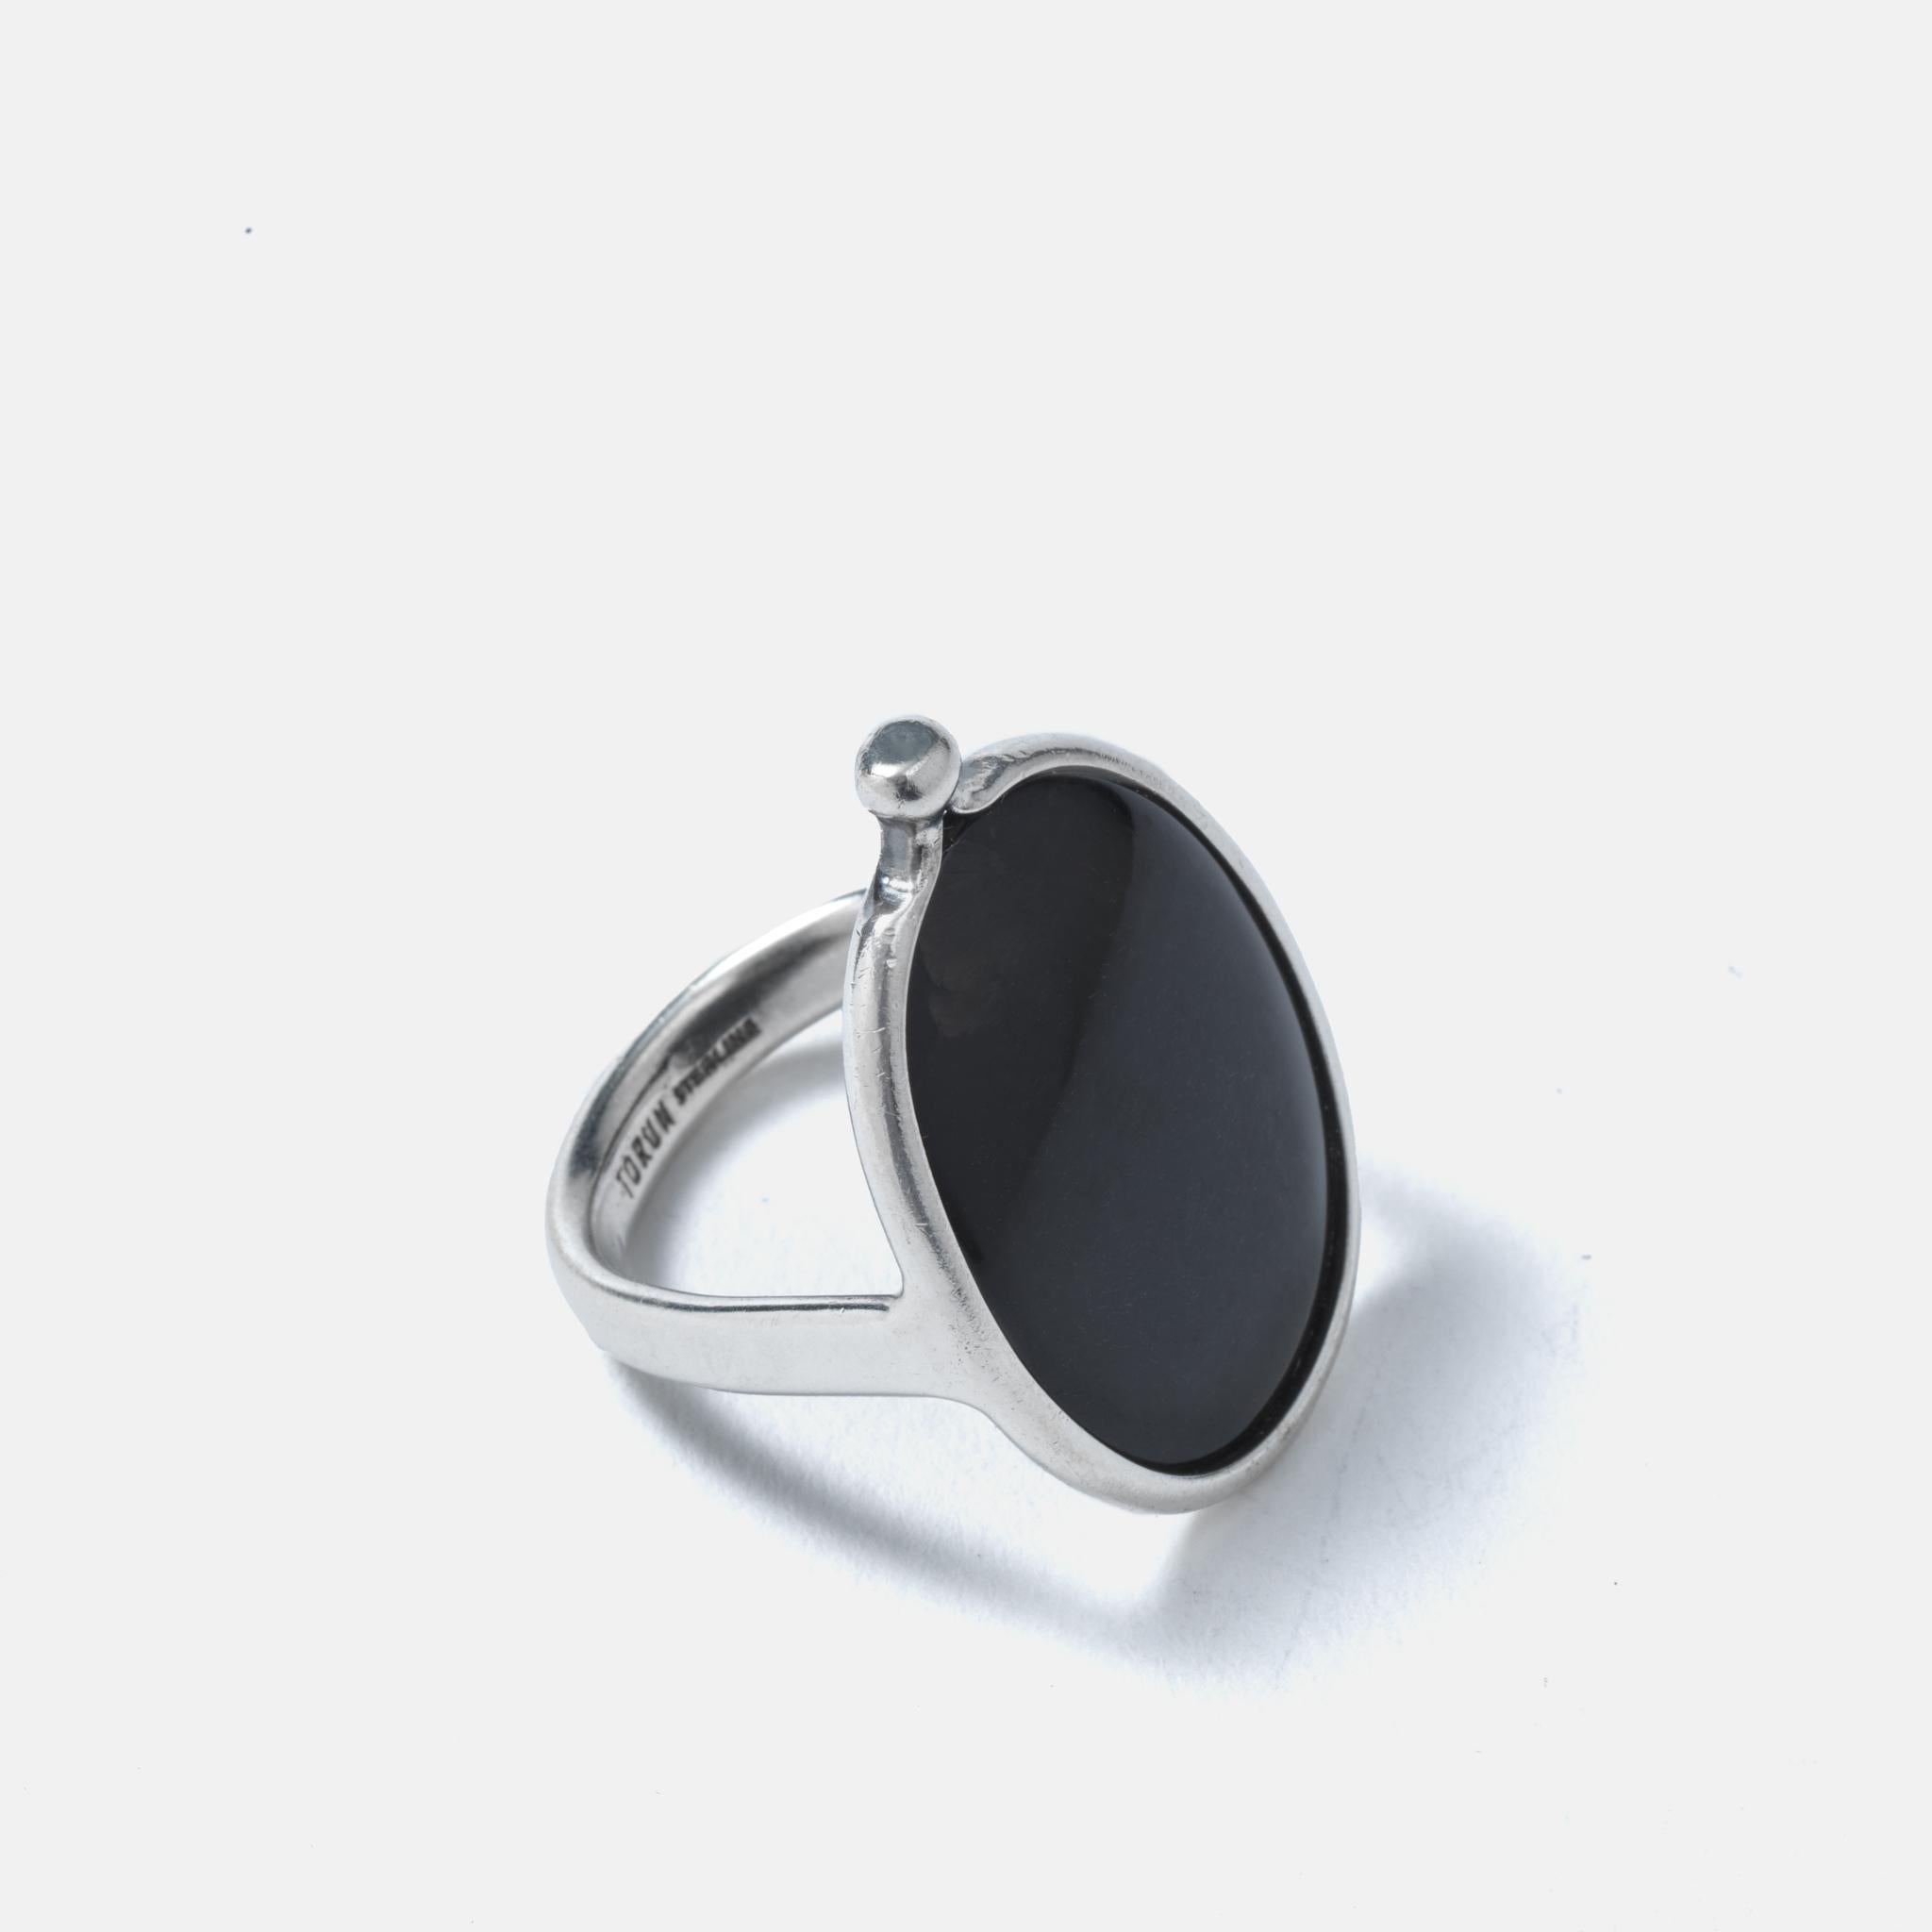 This sterling silver ring is adorned with an oval shaped mother of pearl stone. On one side the framing ends up in a bundle which gives the ring an intriguing look. The mother of pearl stone has a matte black colour and with that something that